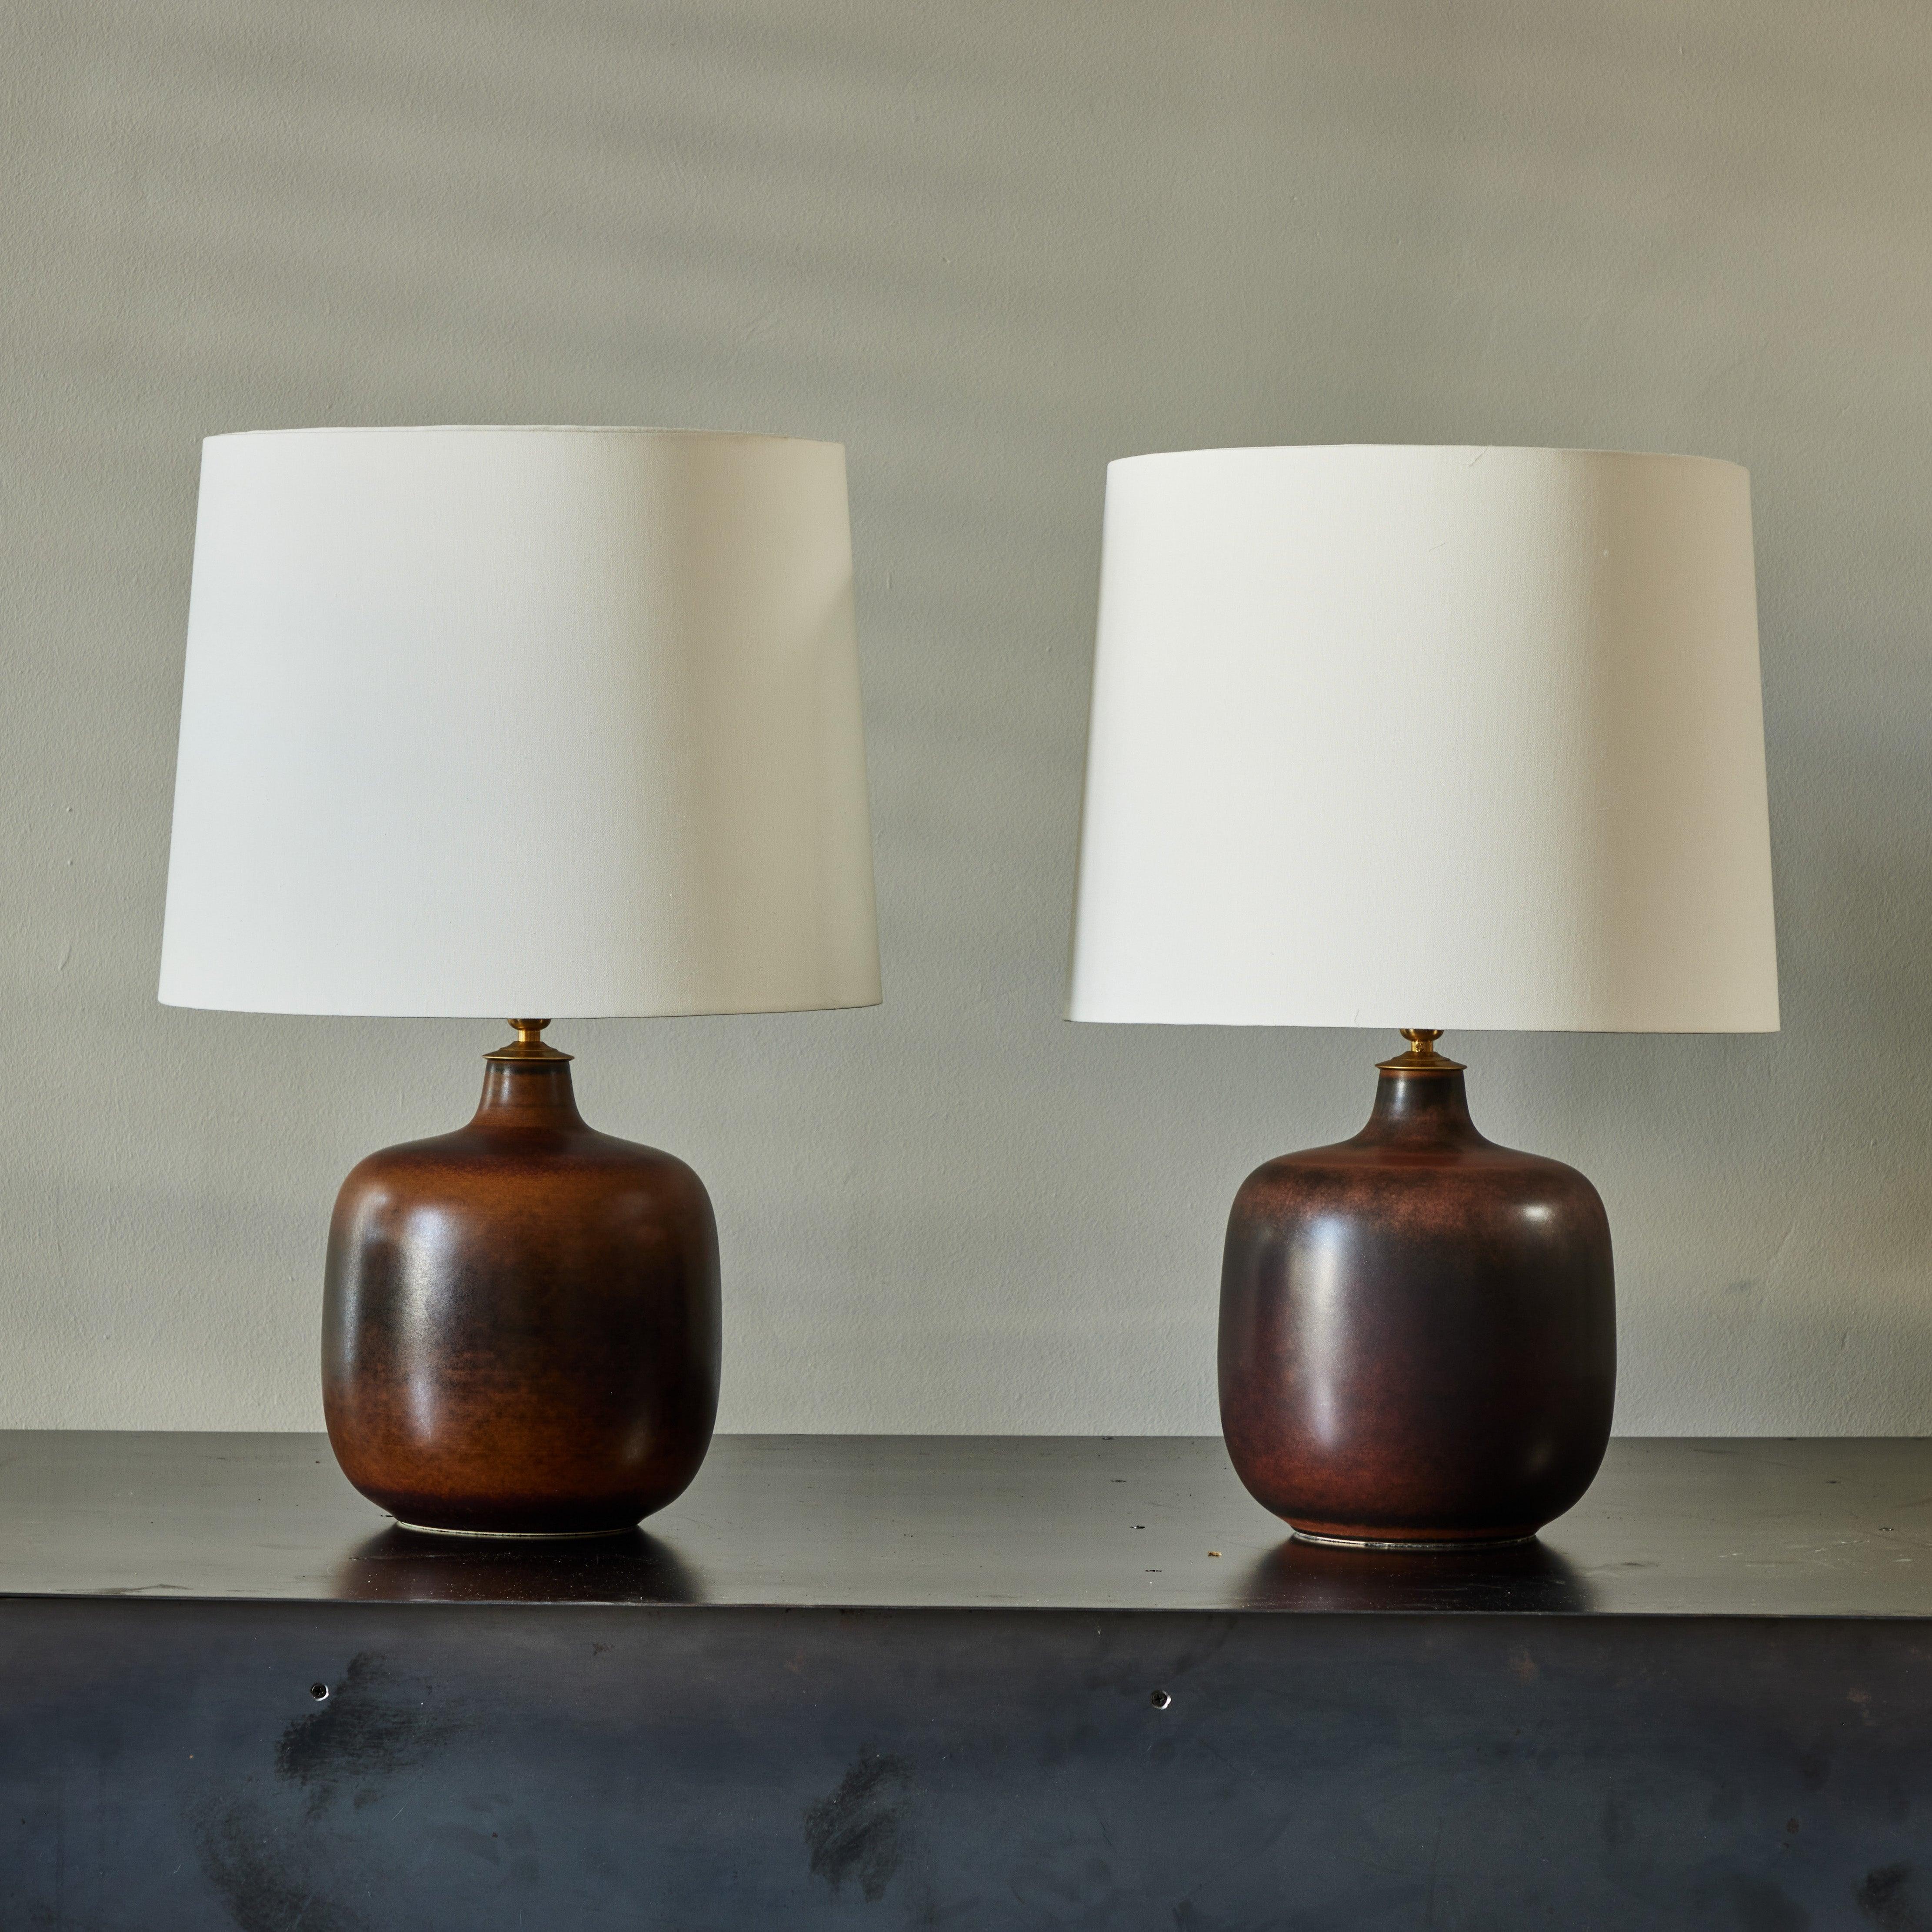 A pair of original Lotte and Gunnar Bostlund ceramic table lamps with subtle brown ombre glazing in a soft satin finish and rounded shape. Includes custom cream-colored linen shades.

Denmark, circa 1960

Dimensions: 16 x 23H.